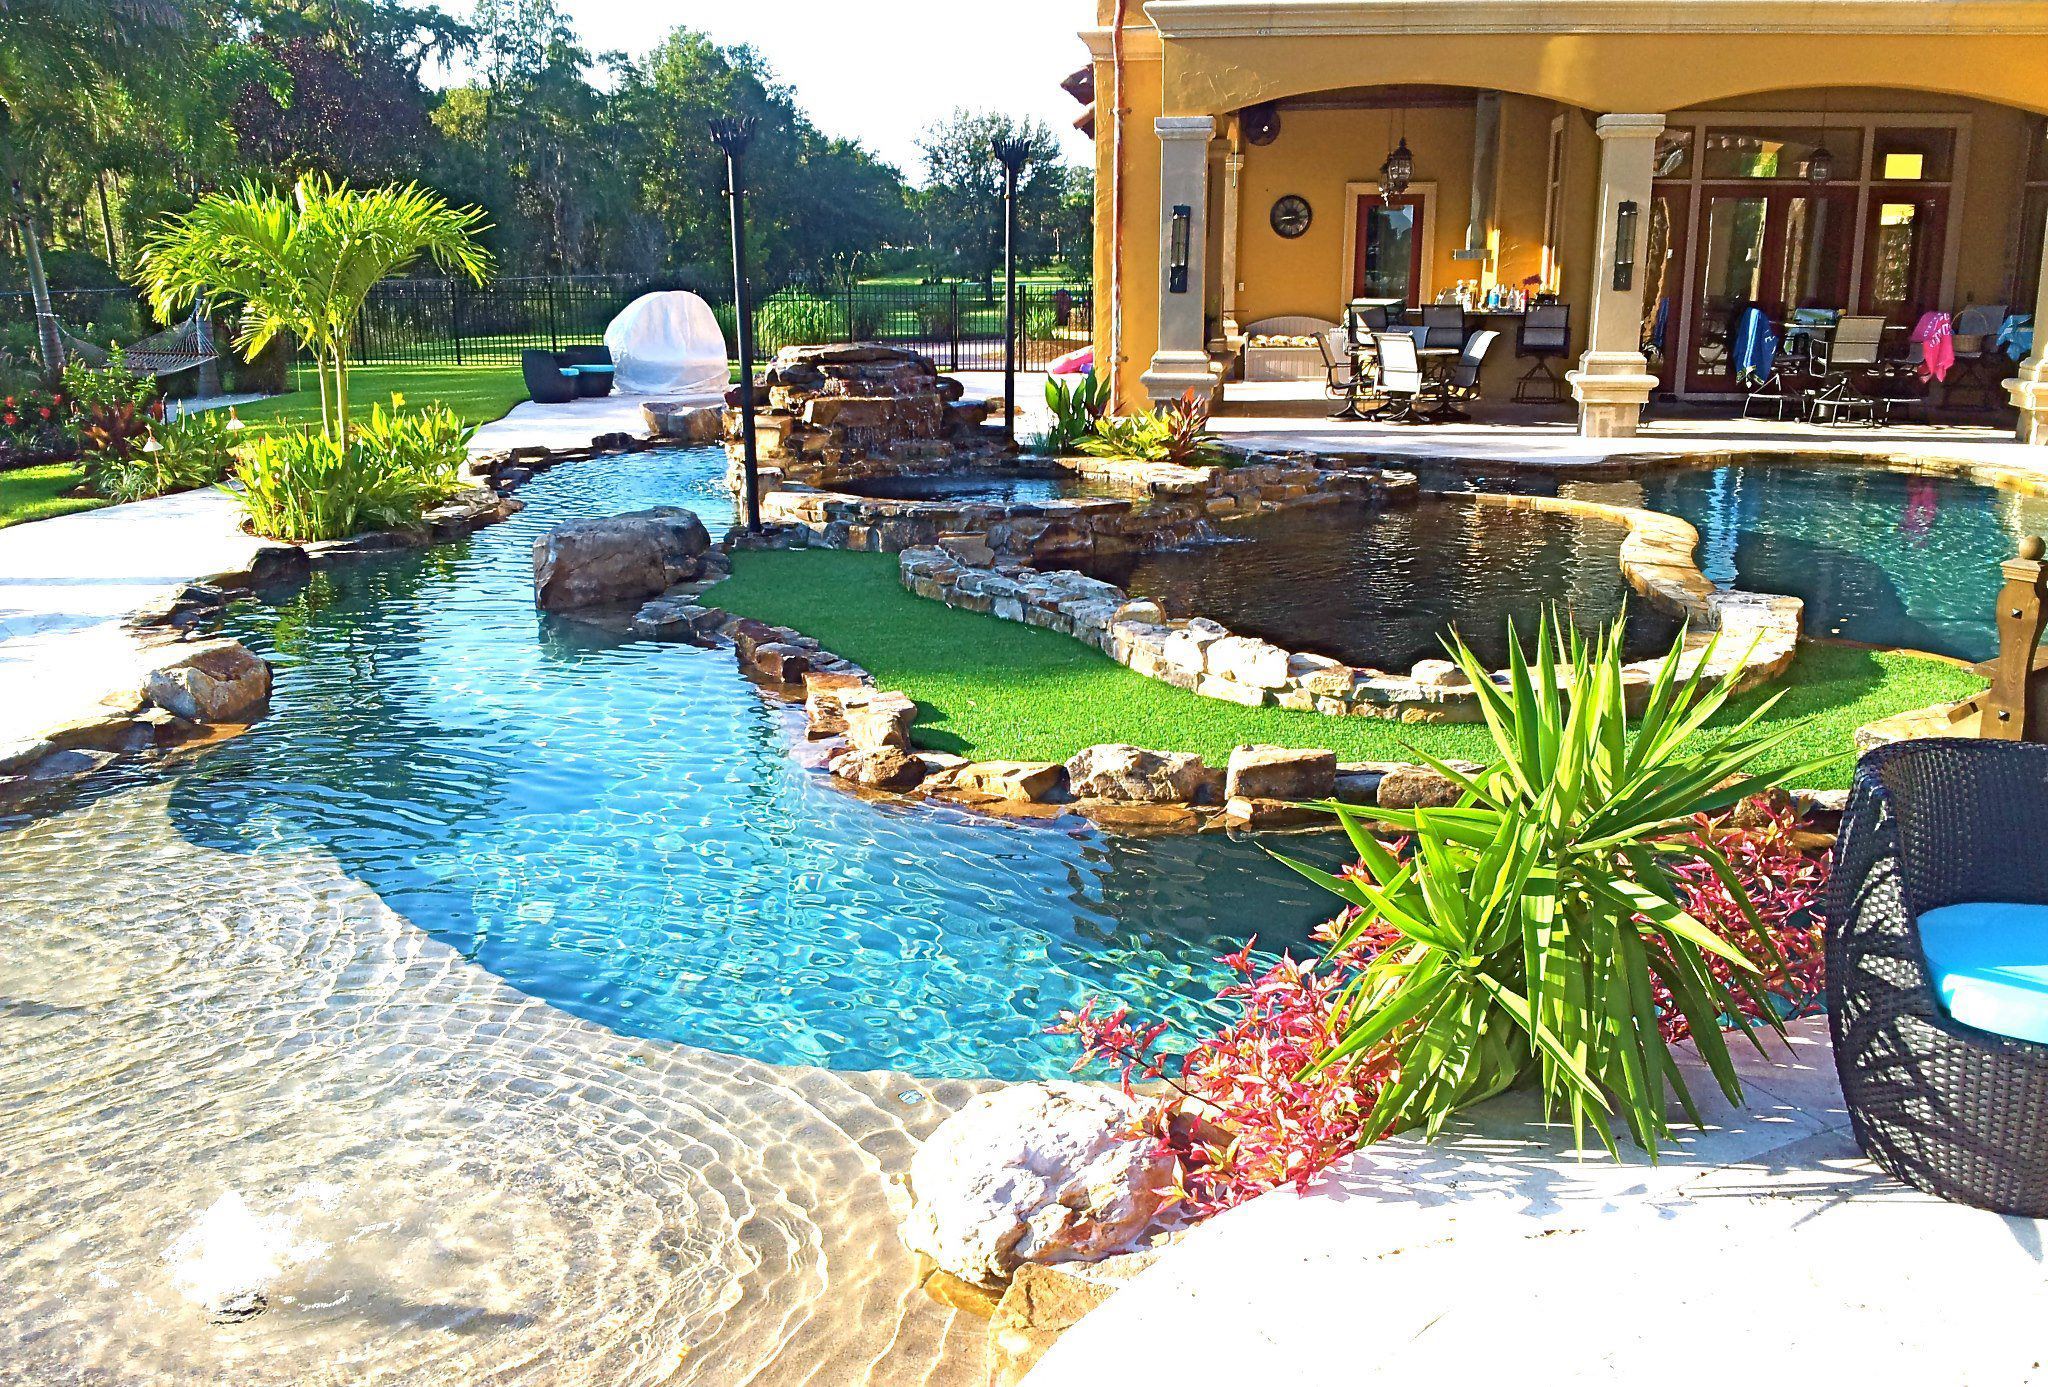 Whirlpool Garten Kosten Best Of Backyard Oasis Lazy River Pool with island Lagoon and